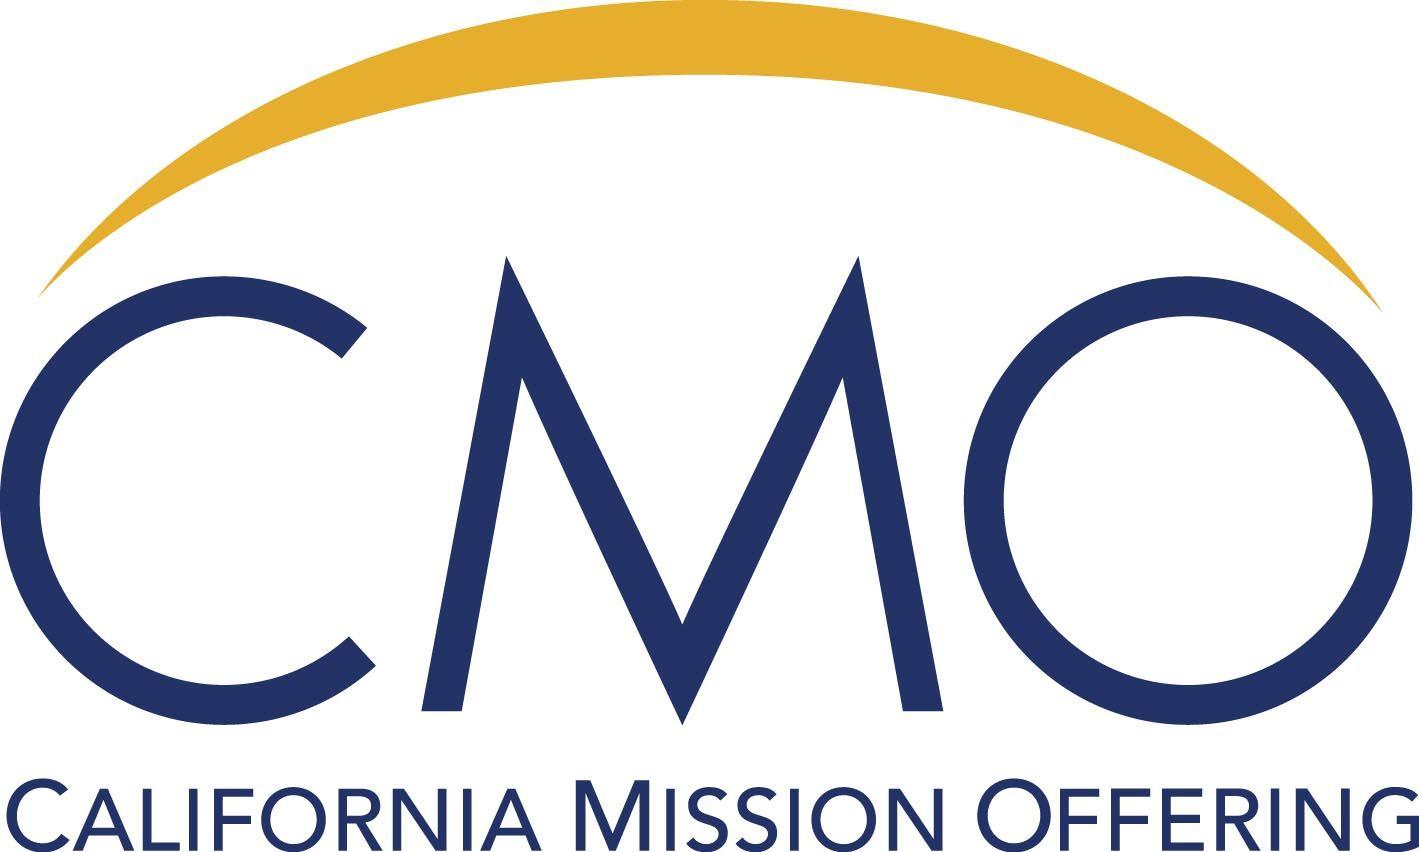 CMO Logo - California Mission Offering: Home: Clip Art Links - 2015